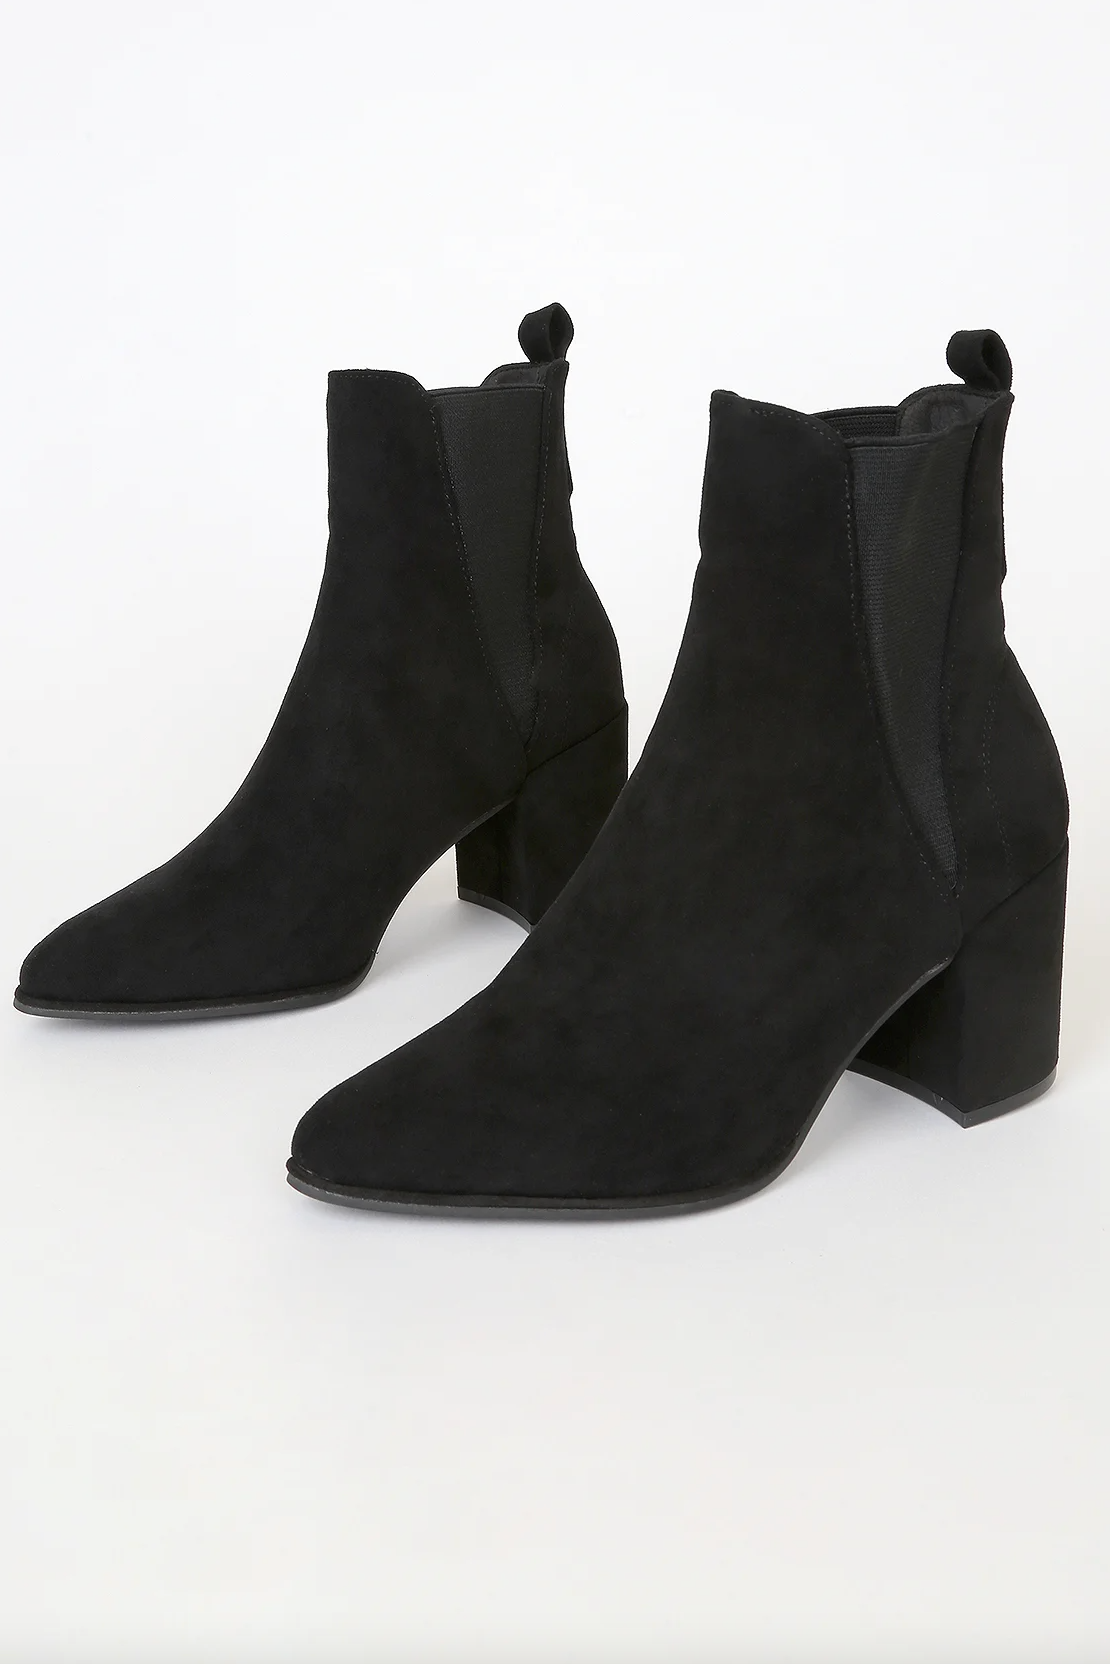 Lulus Zandra Black Suede Pointed-Toe Ankle Booties